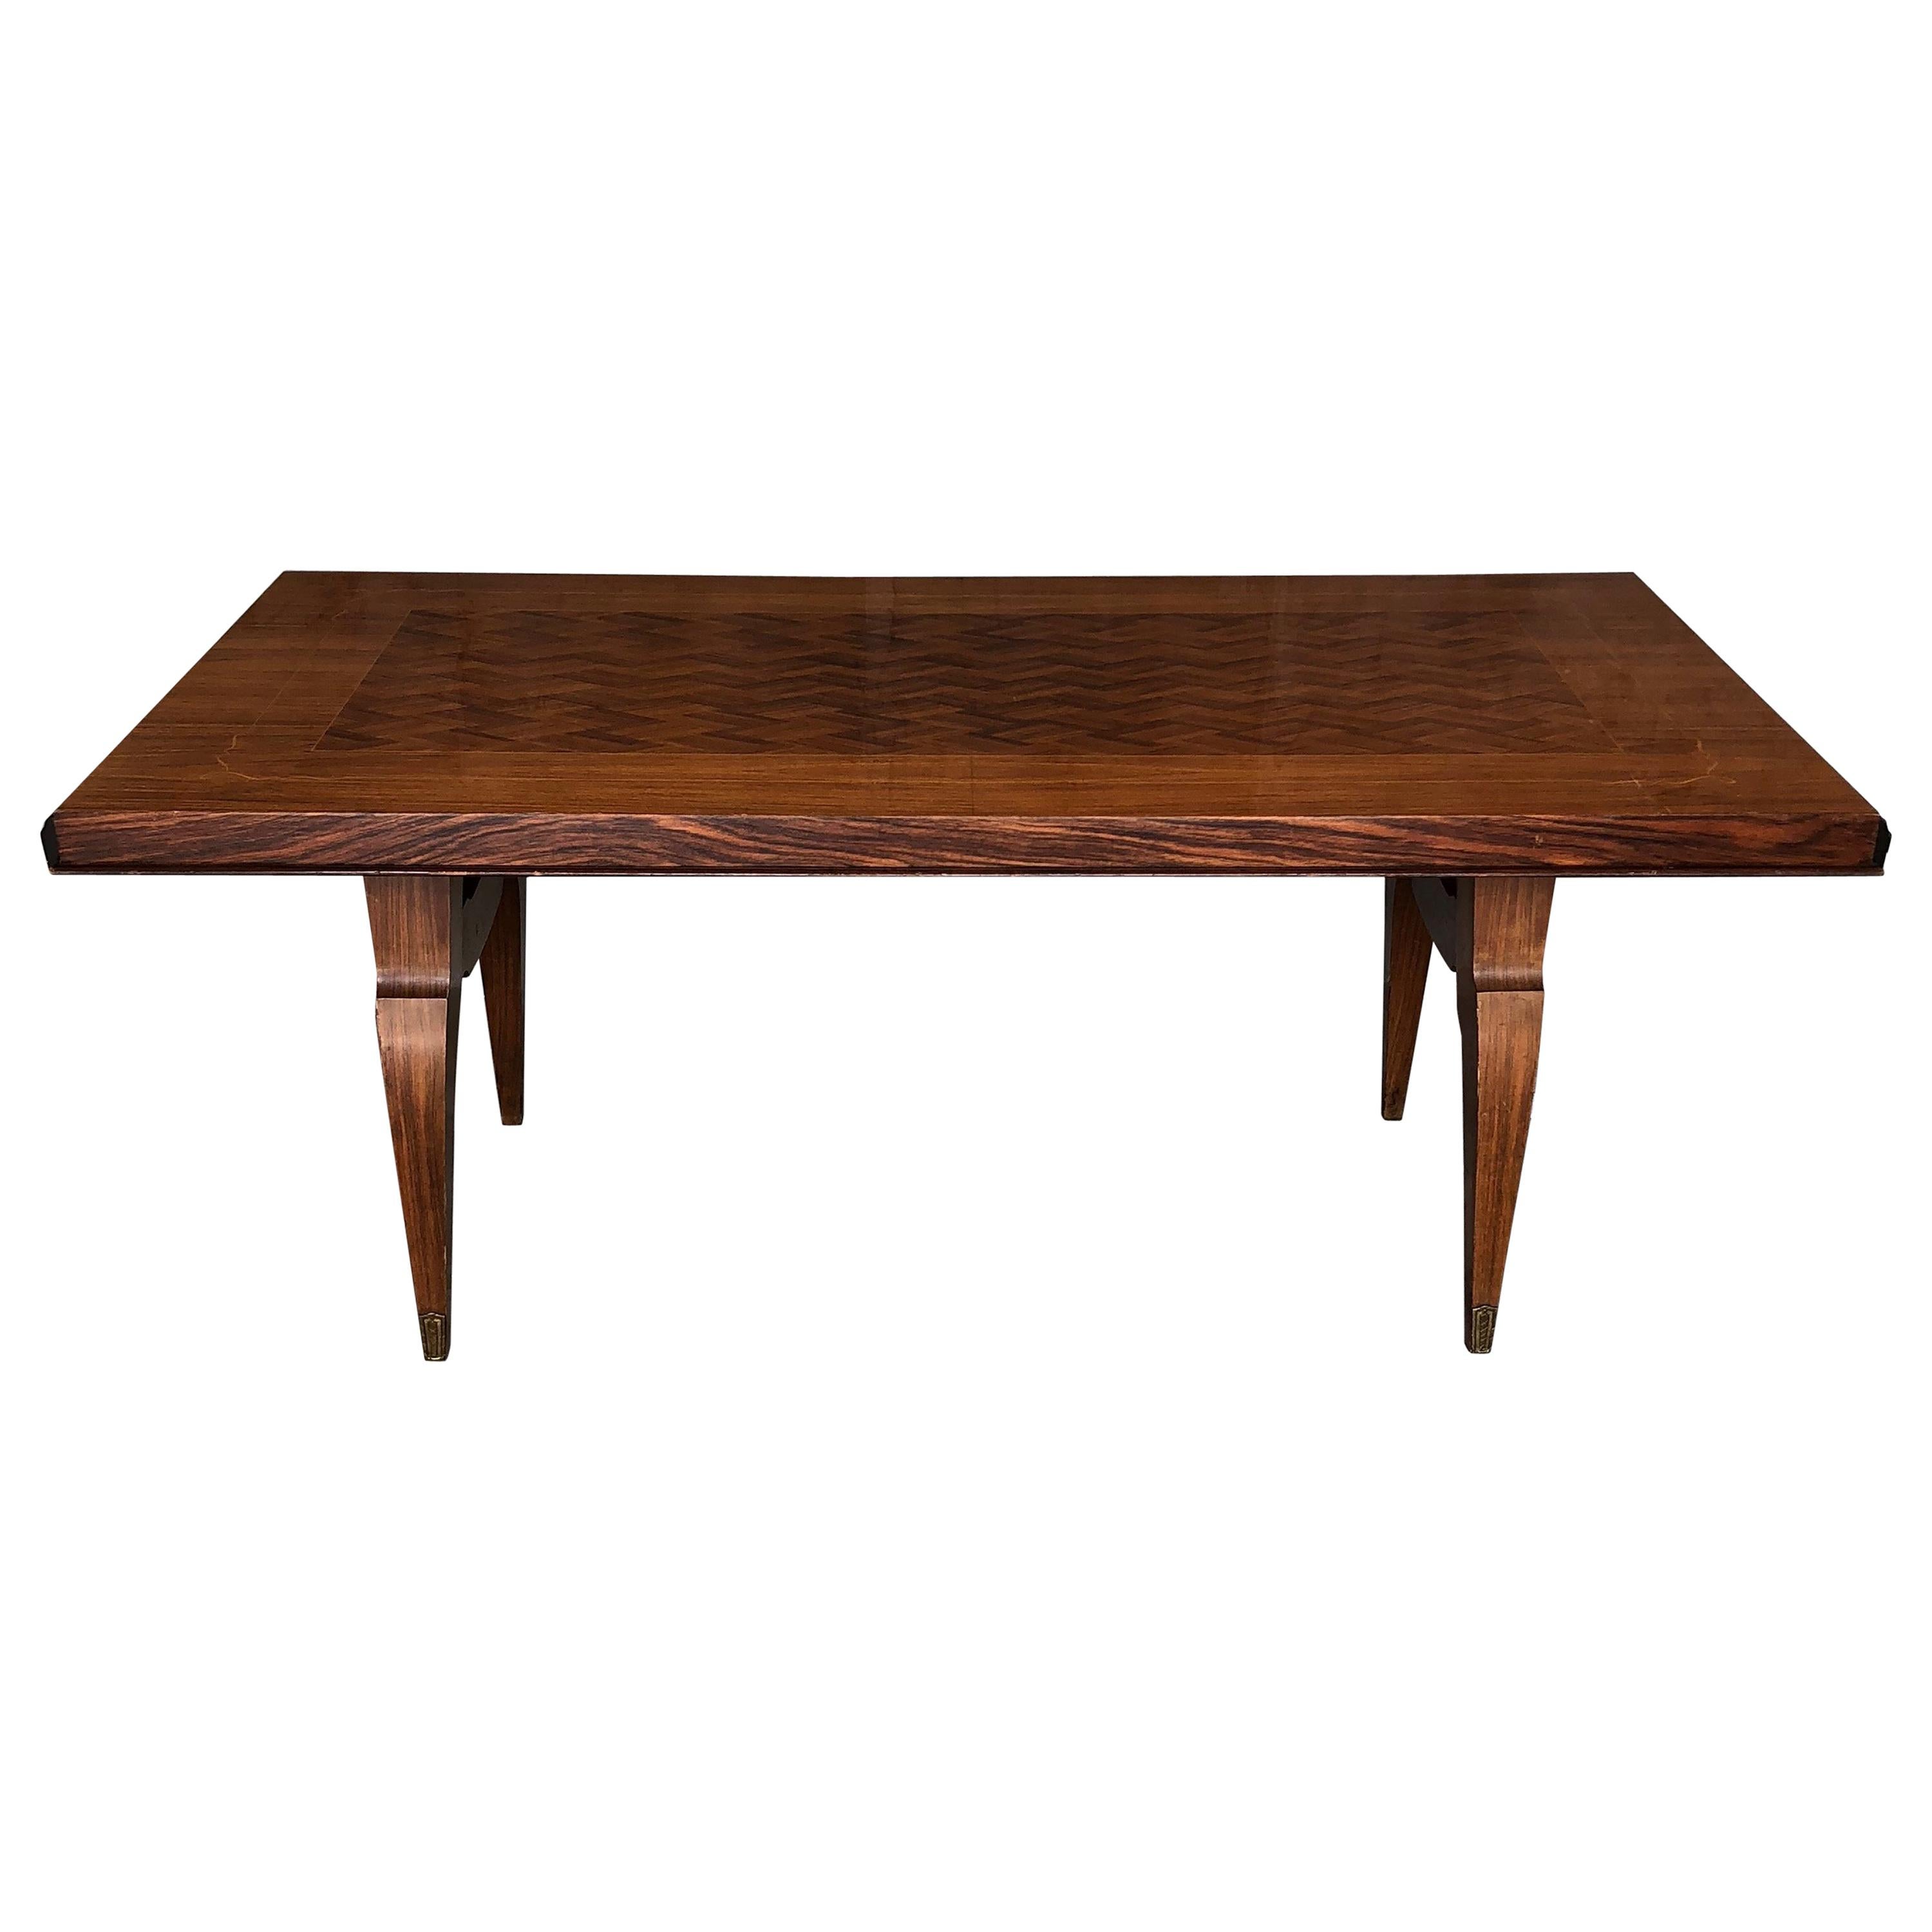 French Art Deco Rosewood Marquetry Dining Table, 1940s For Sale